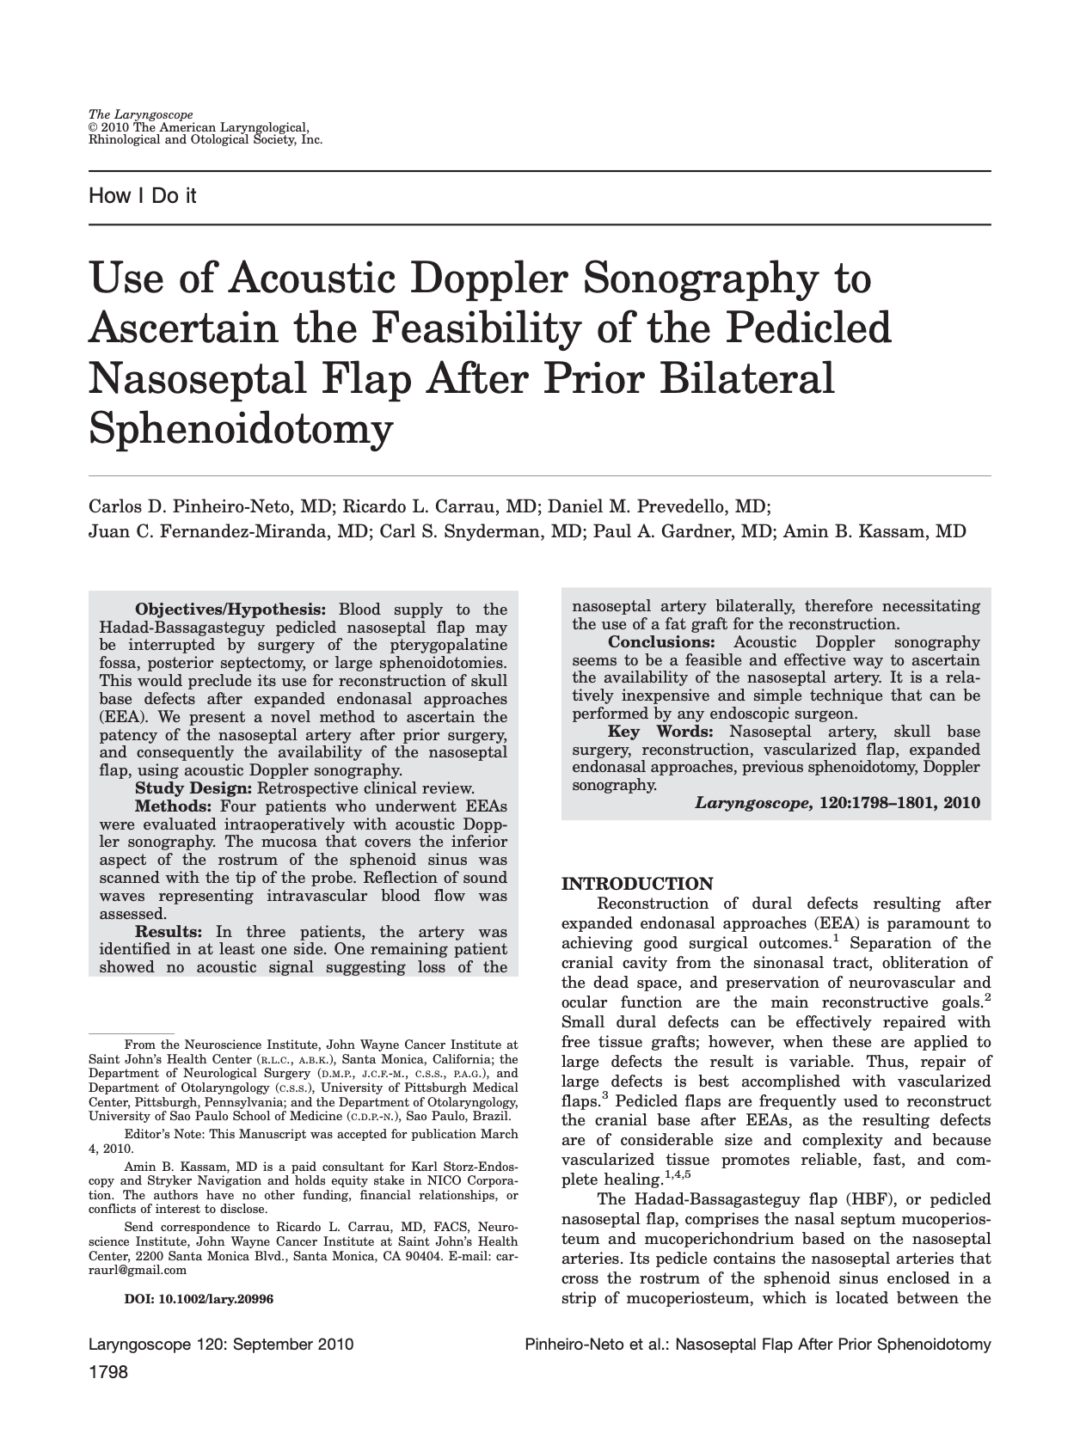 Use of Acoustic Doppler Sonography to Ascertain the Feasibility of the Pedicled Nasoseptal Flap After Prior Bilateral Sphenoidotomy